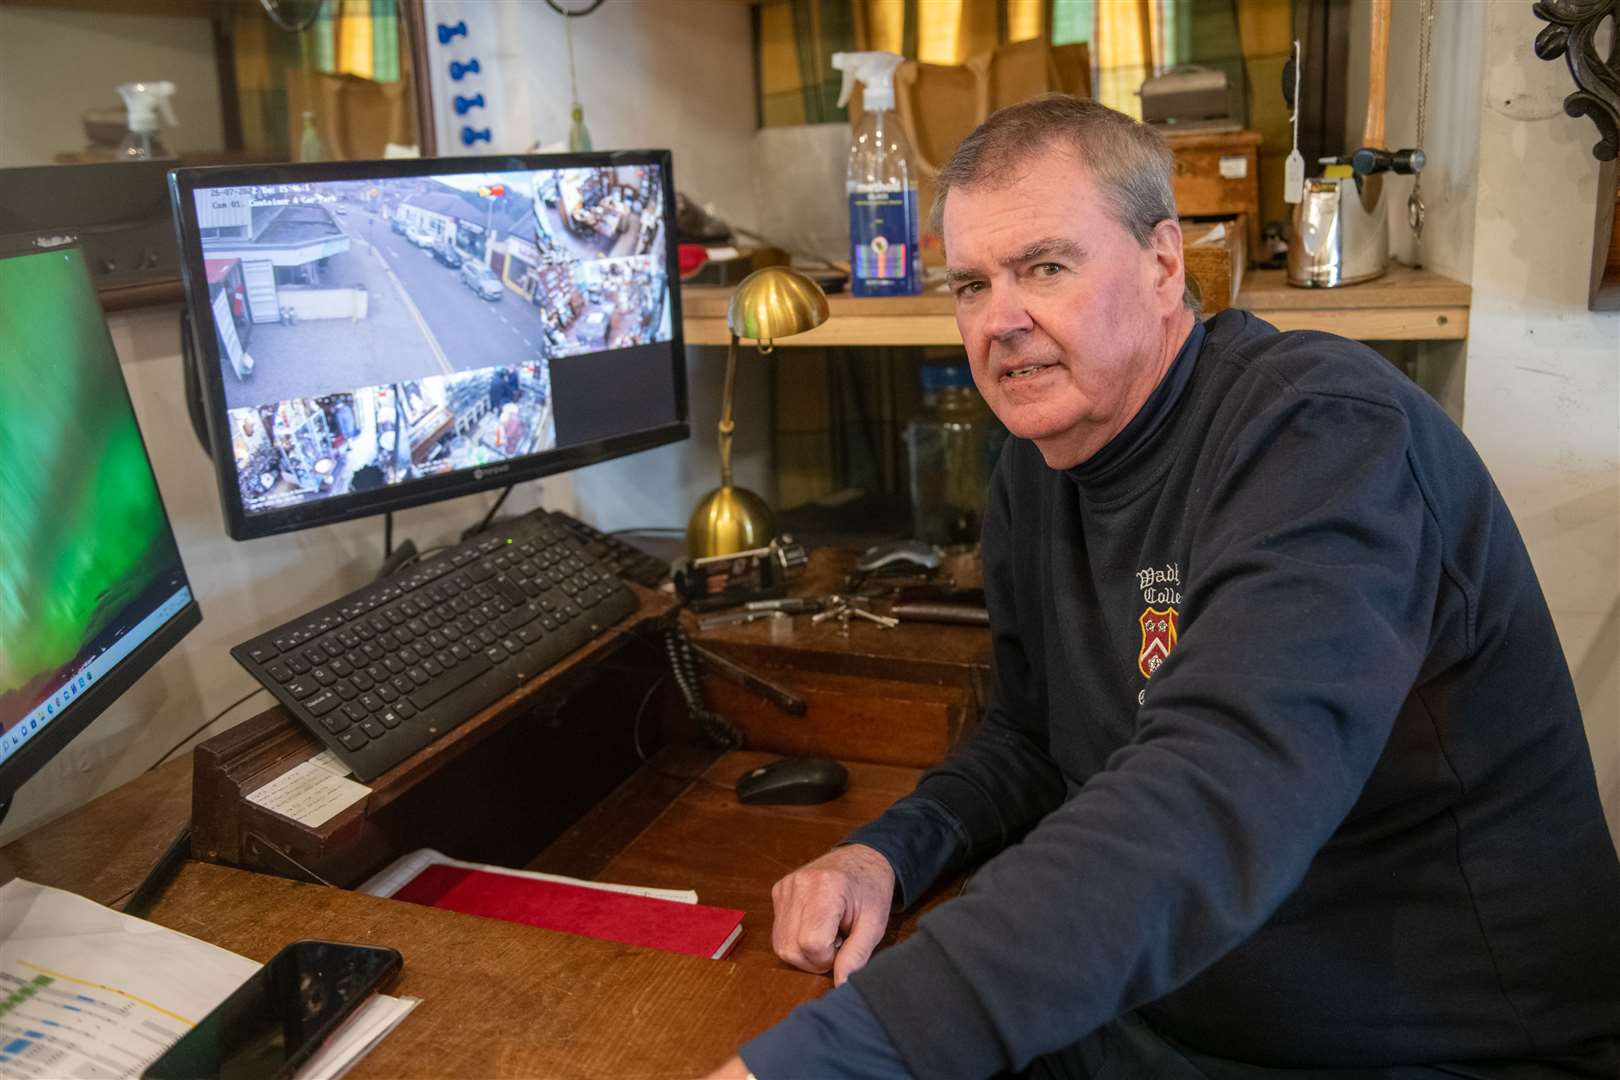 Bill Powrie with his CCTV camera feed. He has CCTV set up in the store and says the theft was caught on video (not pictured here). Picture: Callum Mackay